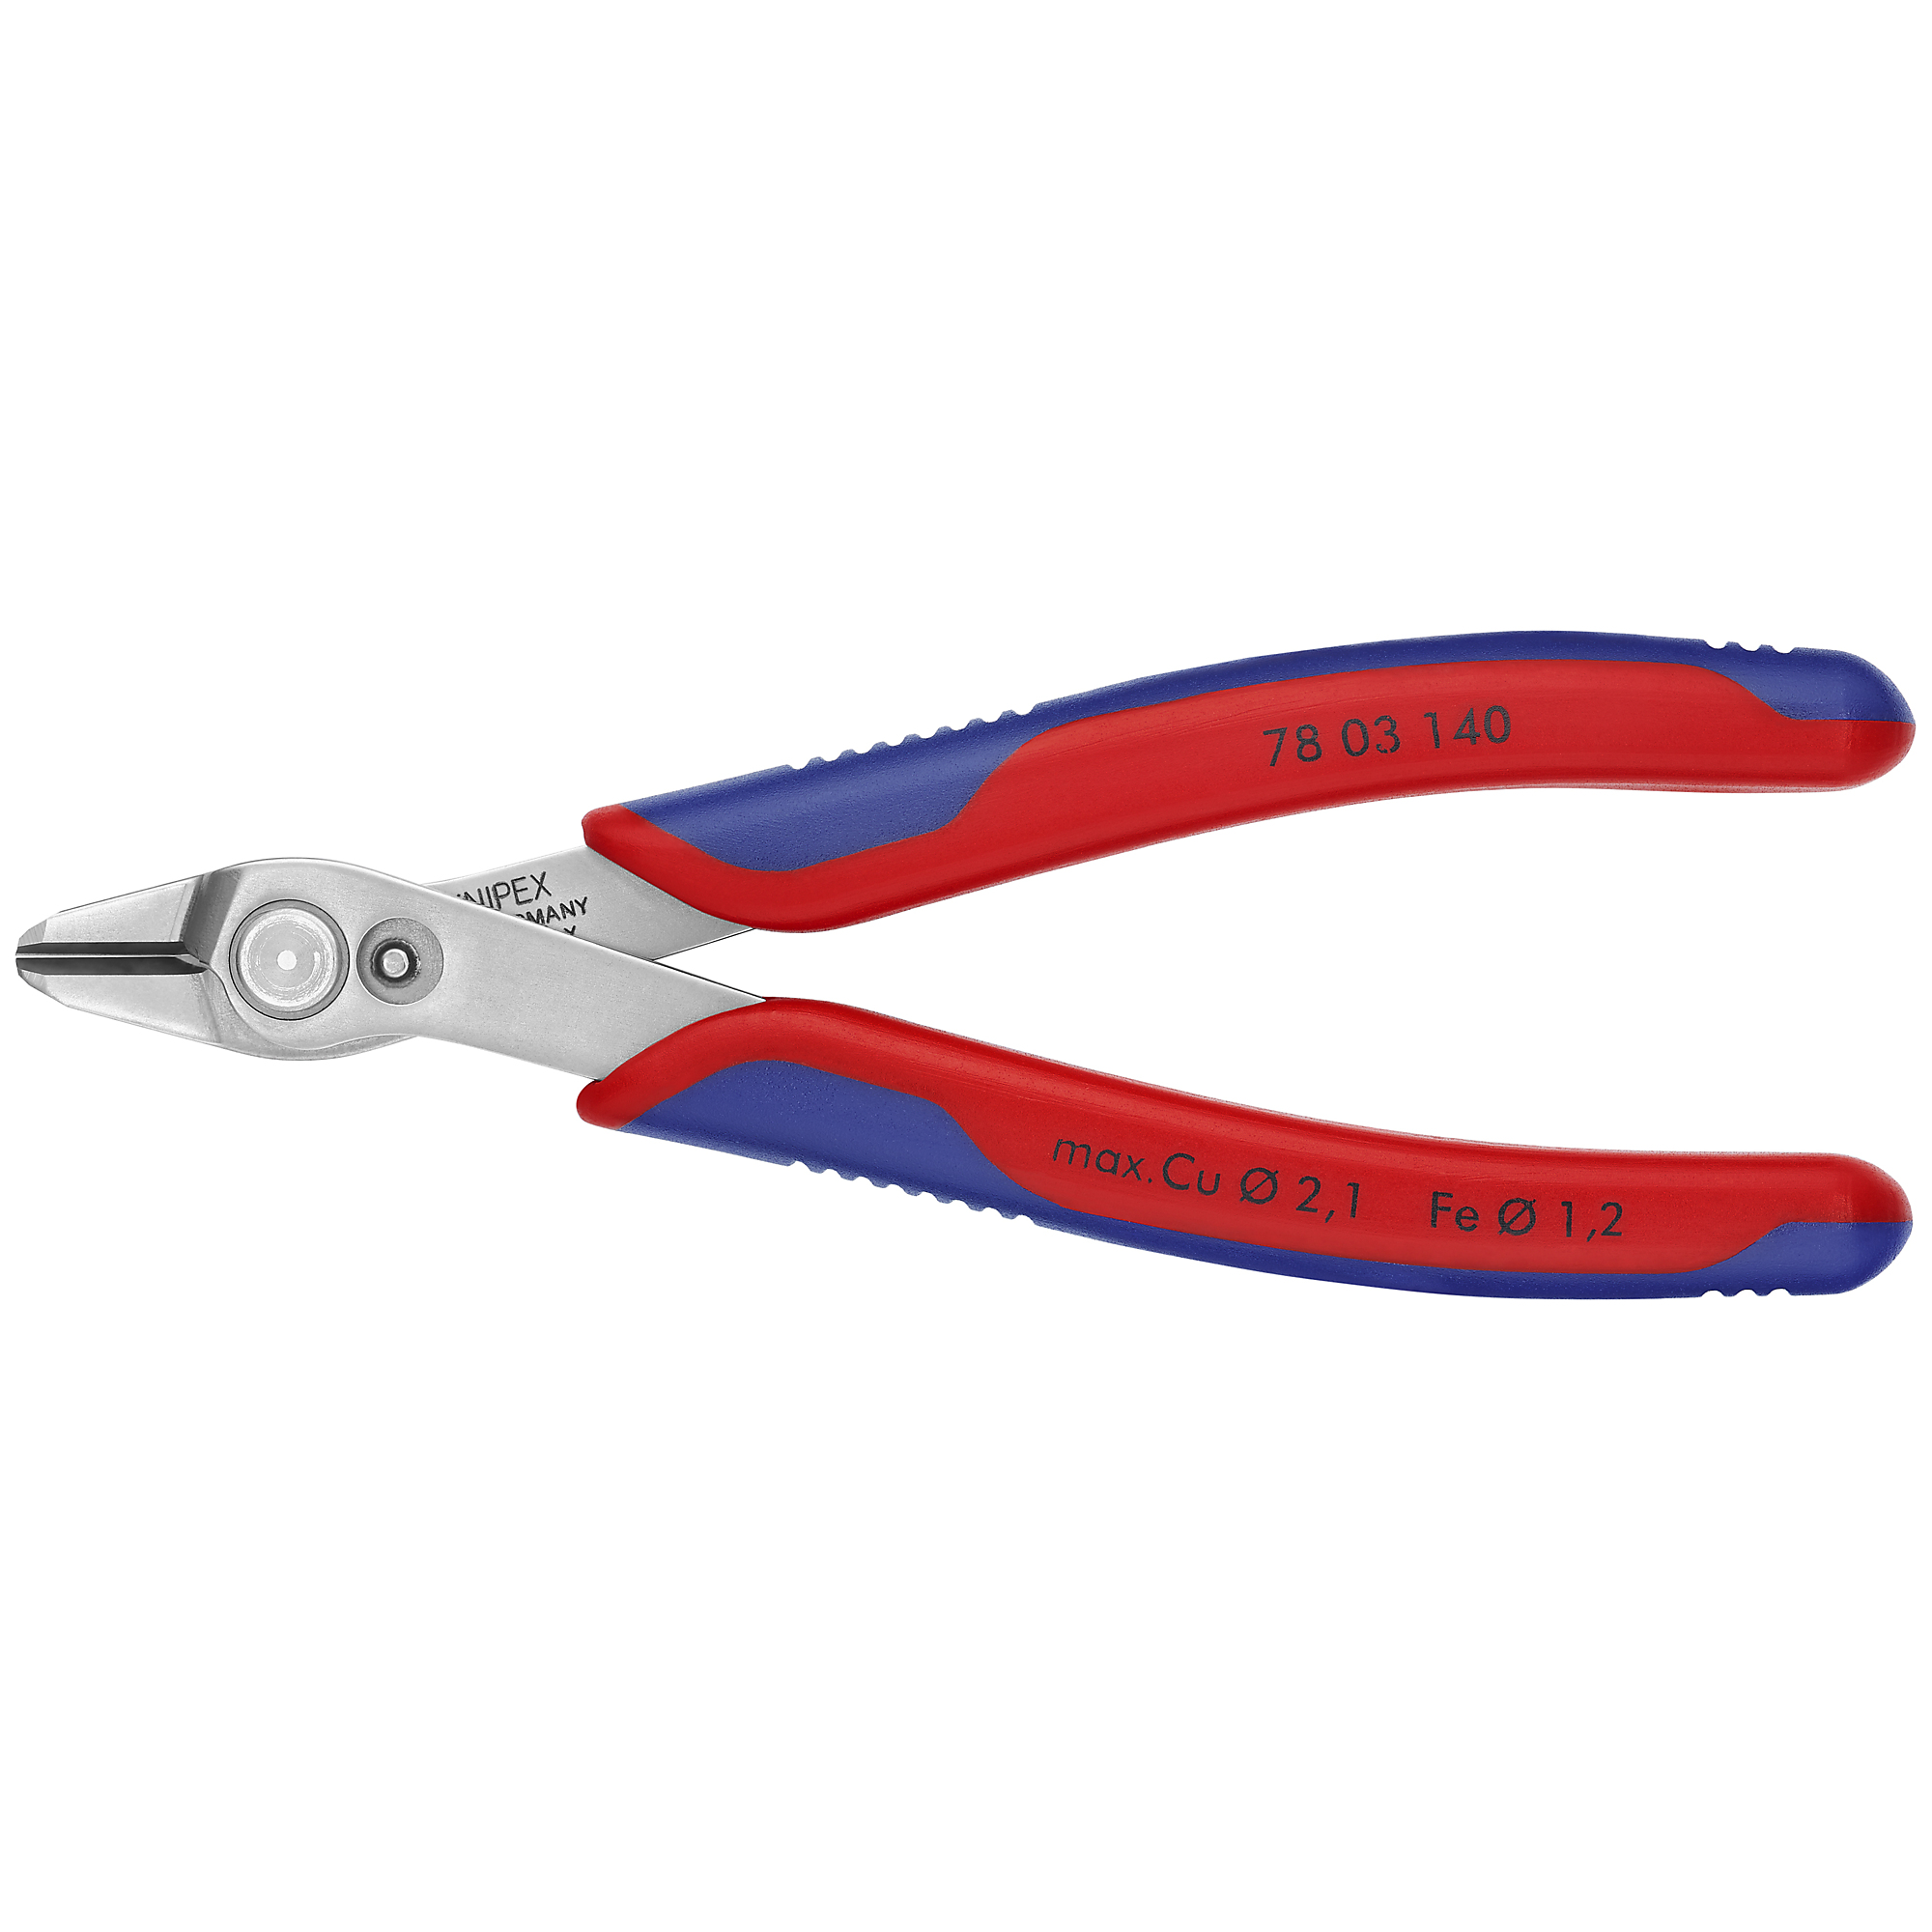 KNIPEX, Knips Pliers, 5.5in., Multi-component, Pieces (qty.) 1, Material Stainless 03 140 SBA | Northern Tool